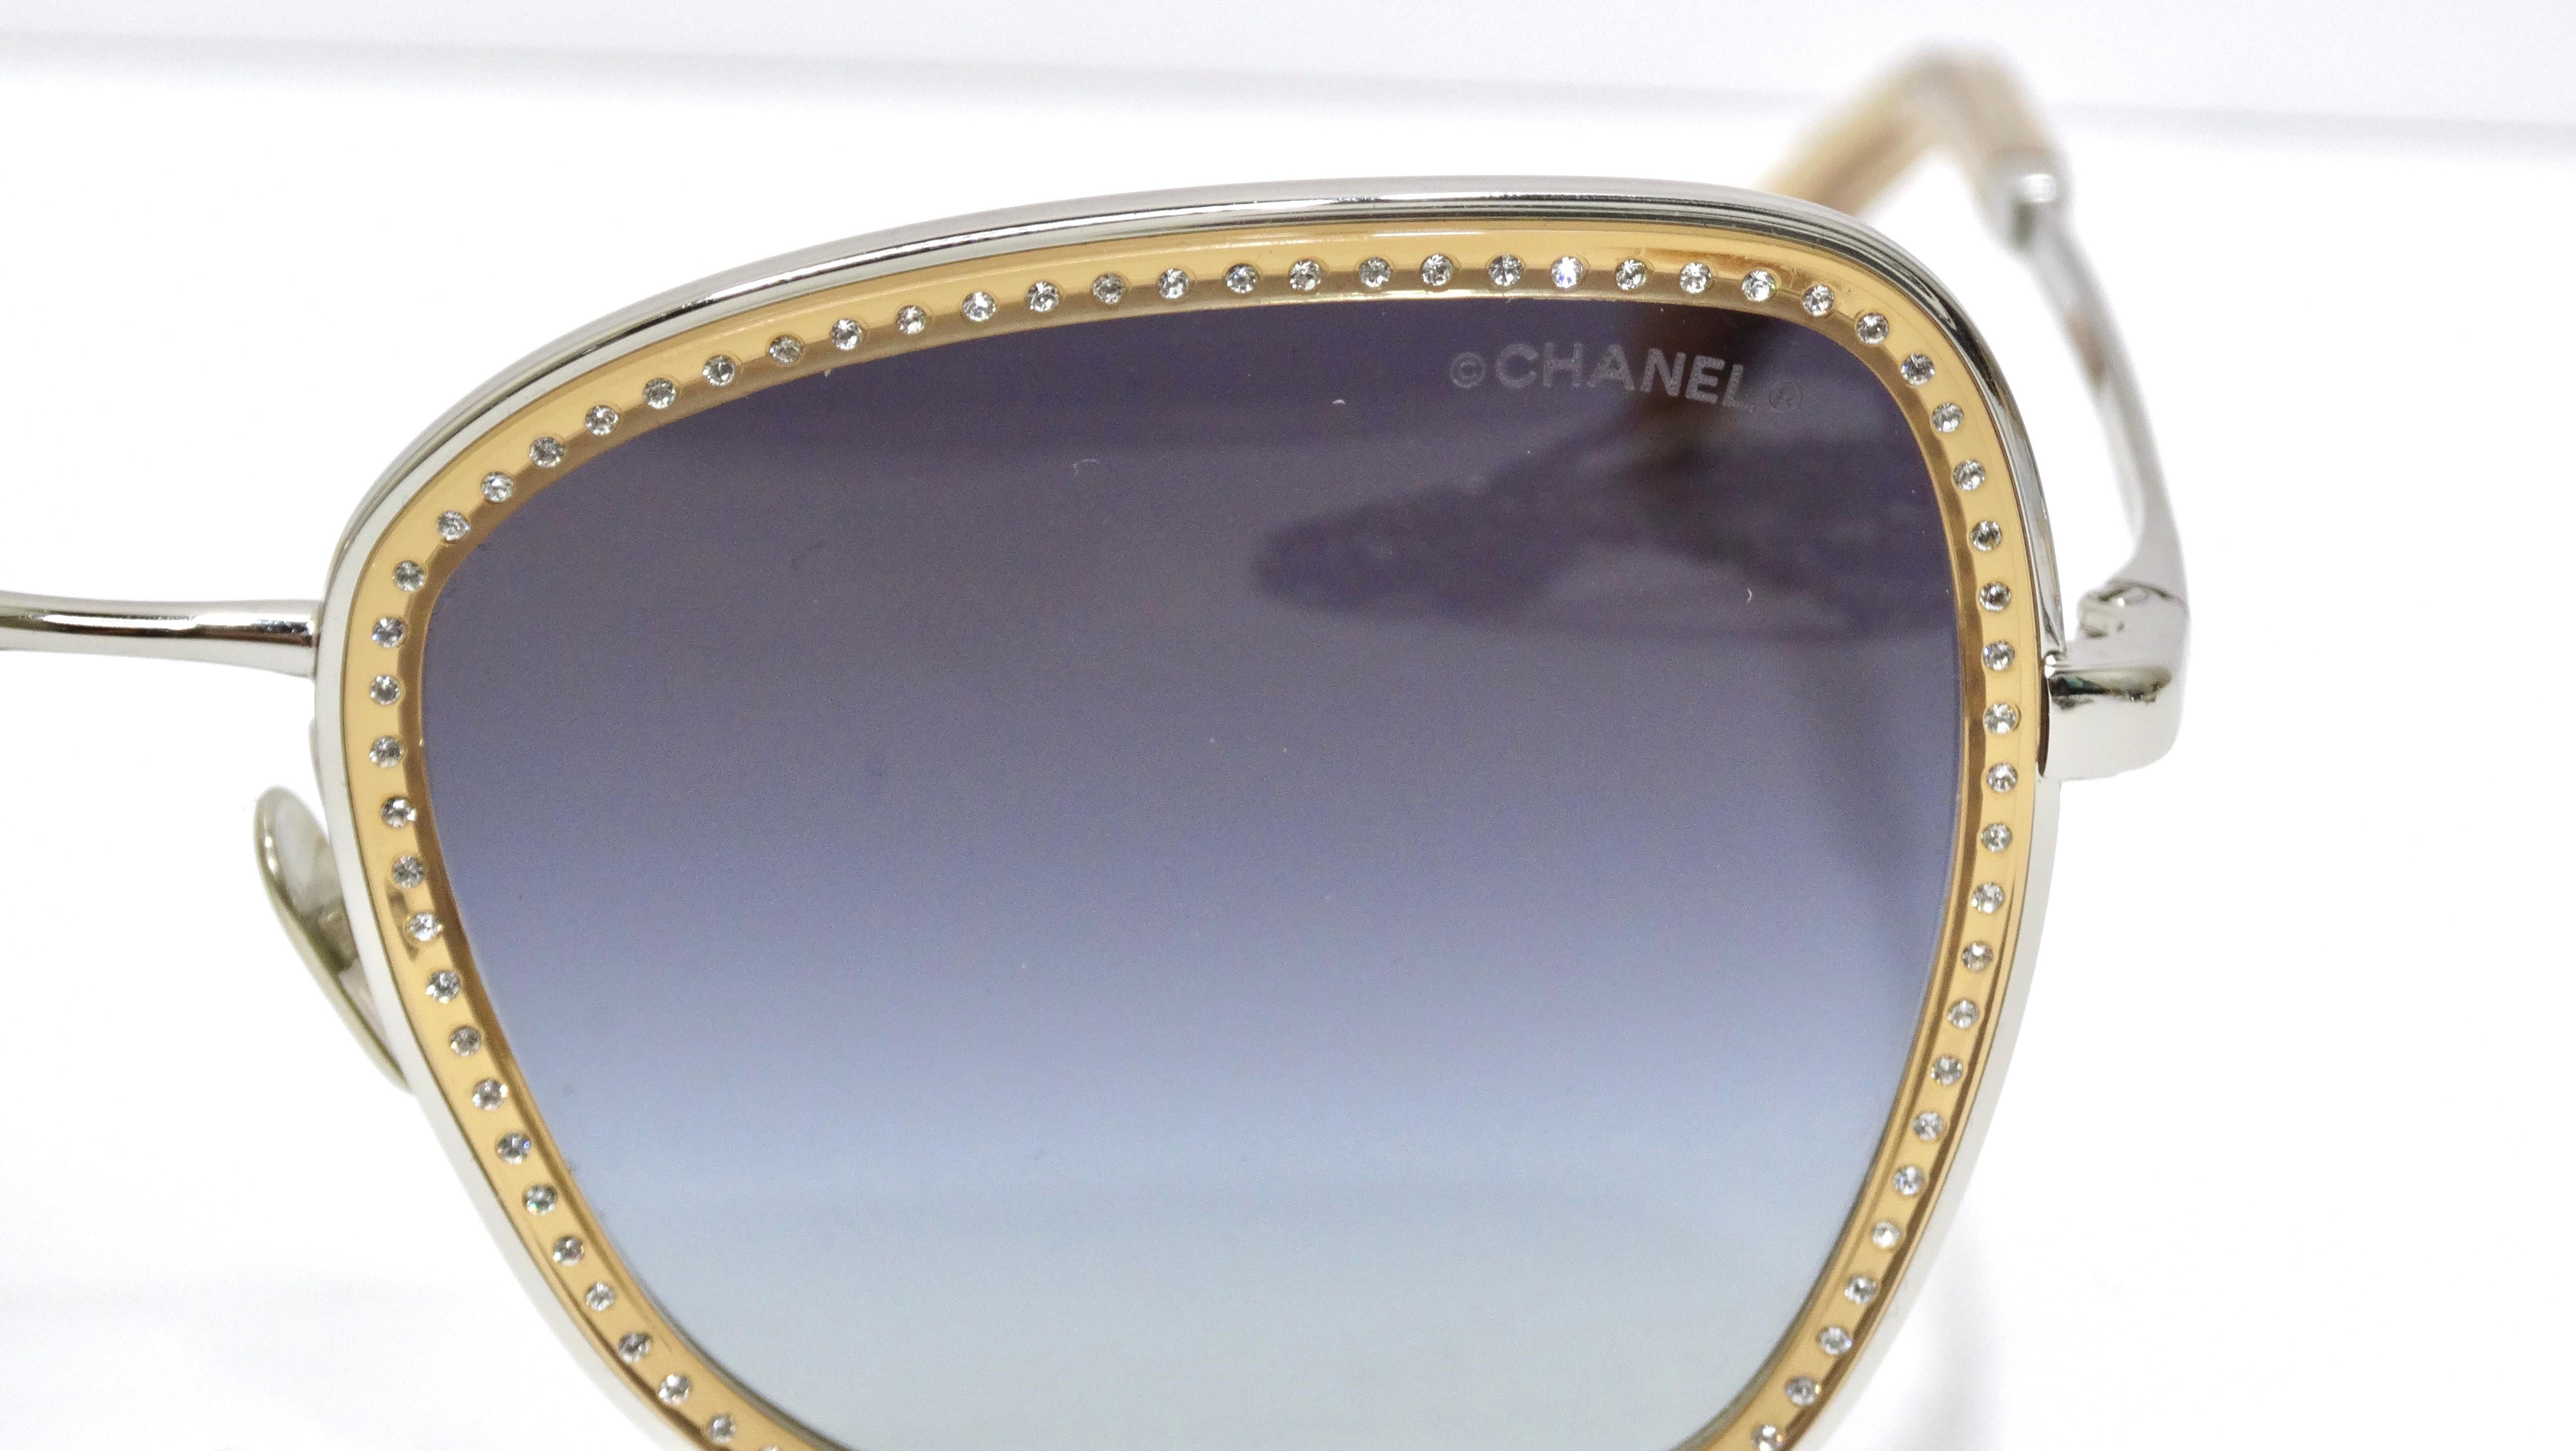 The iconic house of Chanel gives you a classic yet glamorous pair of sunglasses. Chanel will never fail to deliver a luxe and timeless piece. These sunglasses are brand new with the tags still attached. These sunglasses effortlessly mixes gold